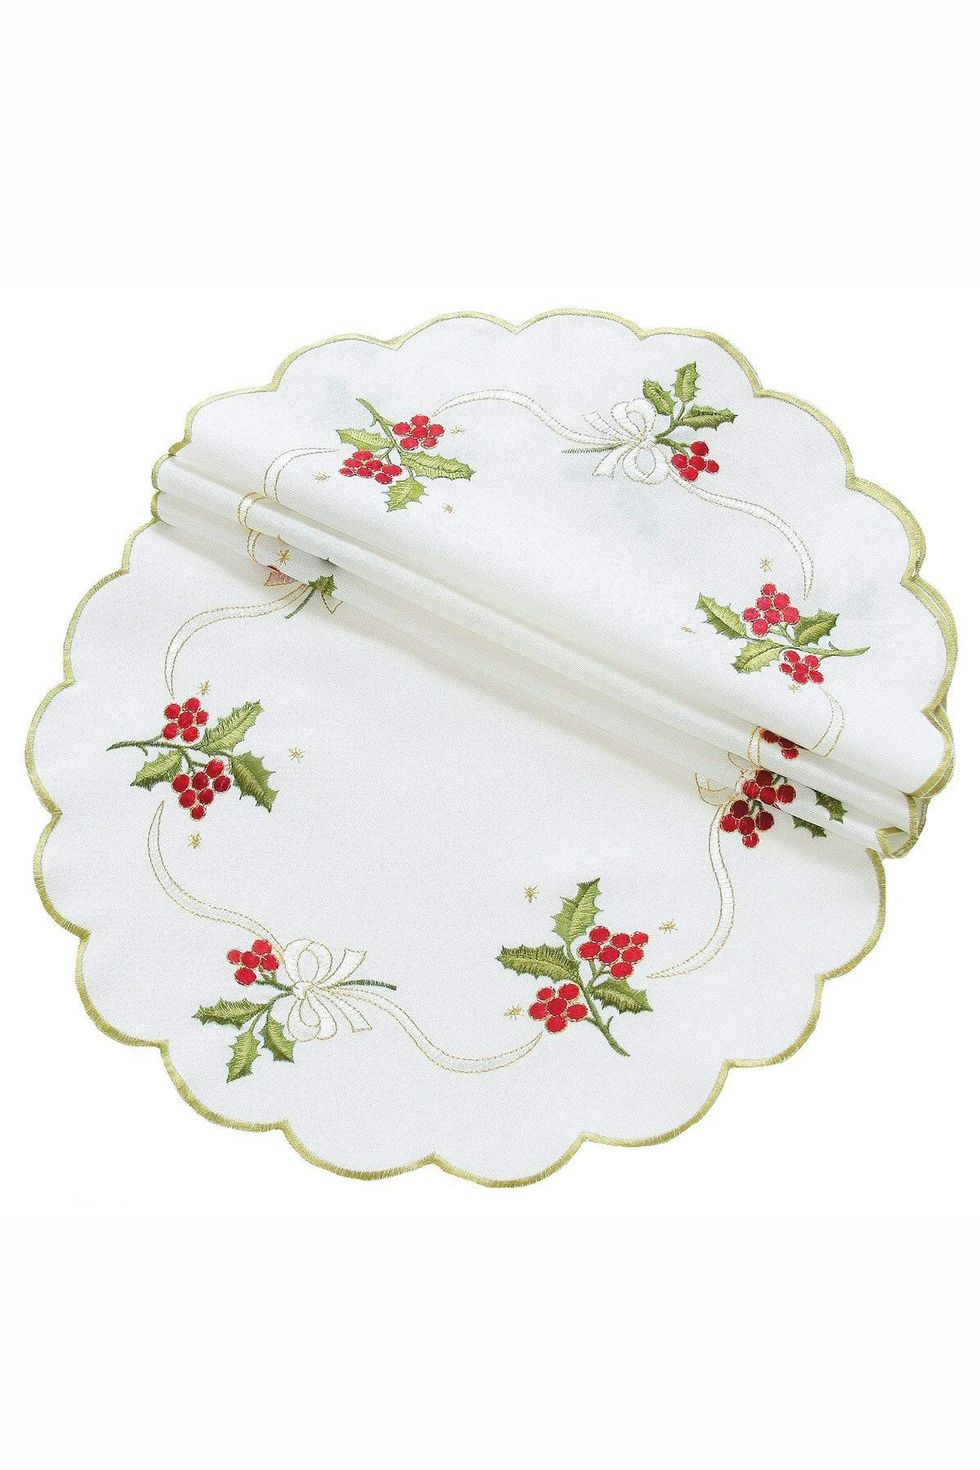 Holly Berry Embroidered Christmas Doilies Placemats